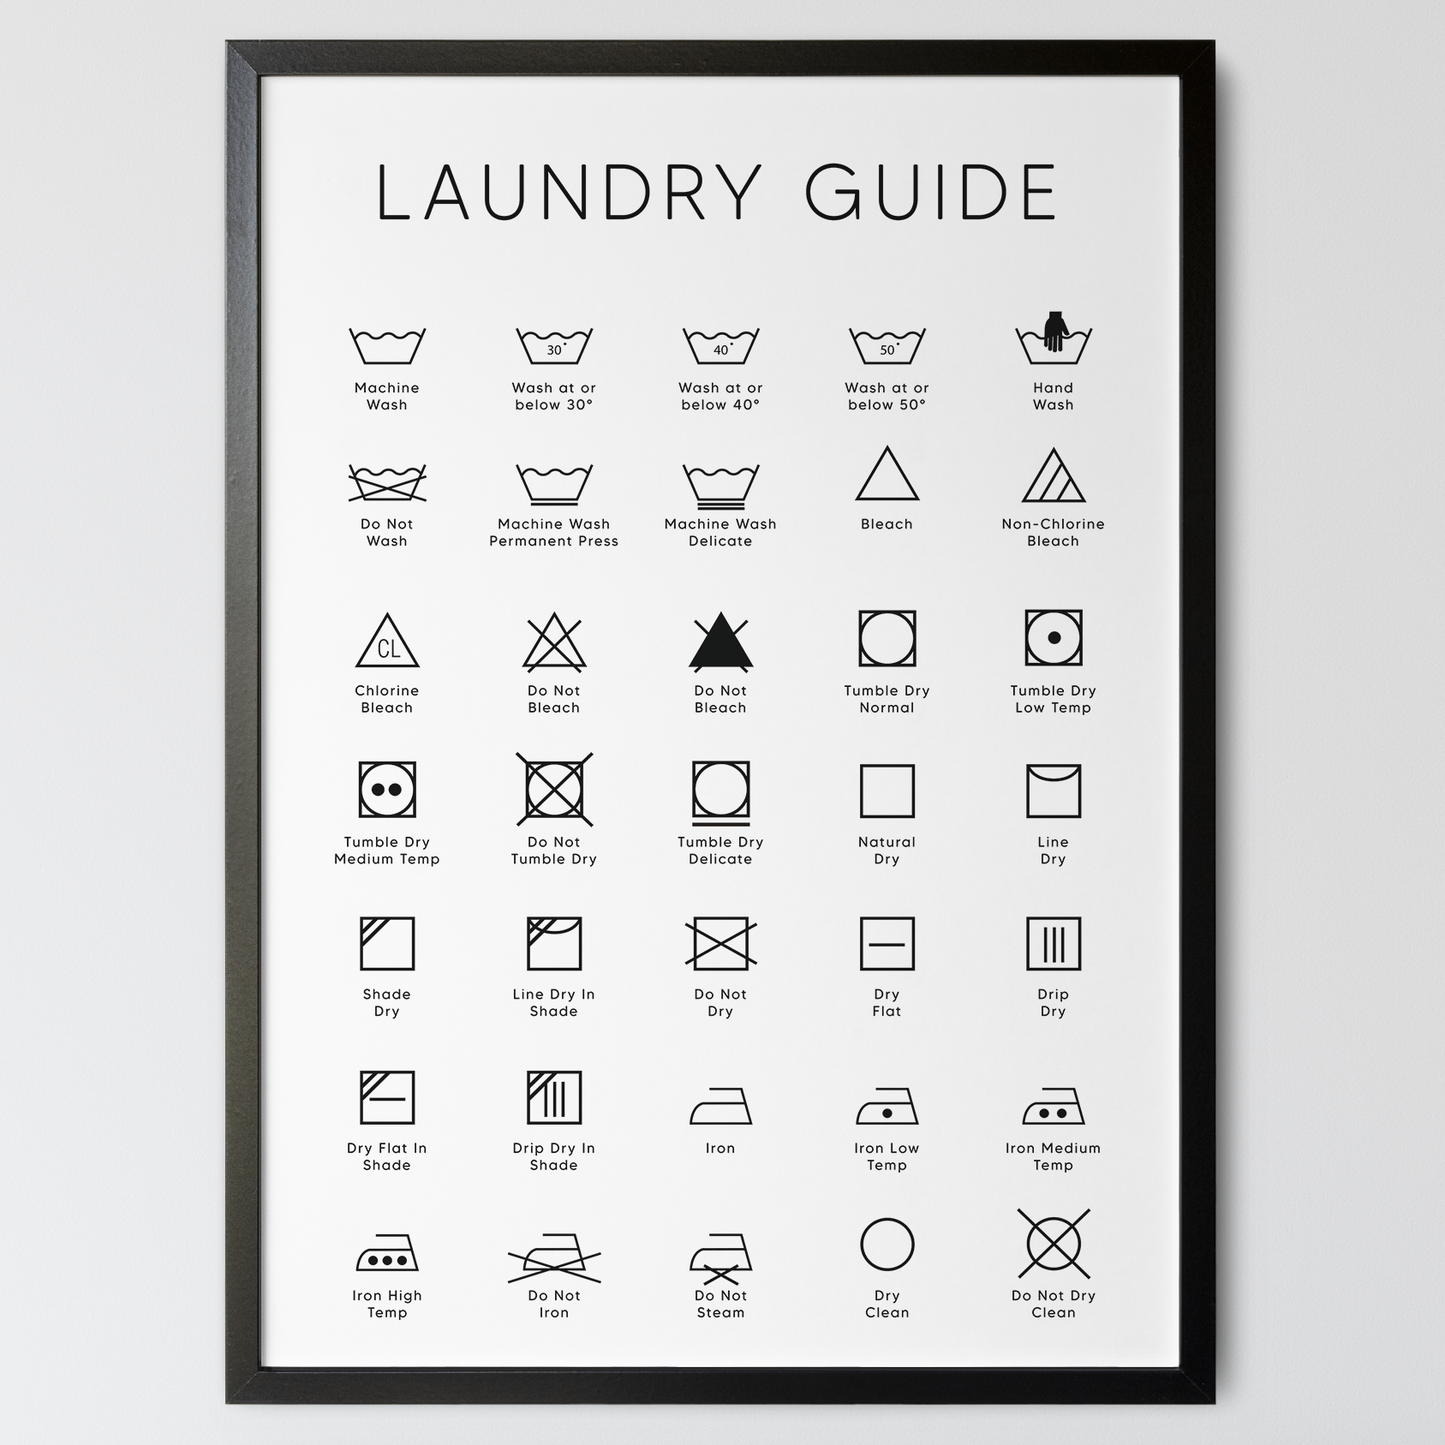 Laundry Symbols Chart Poster - Washing Machine Clothes Care Guide